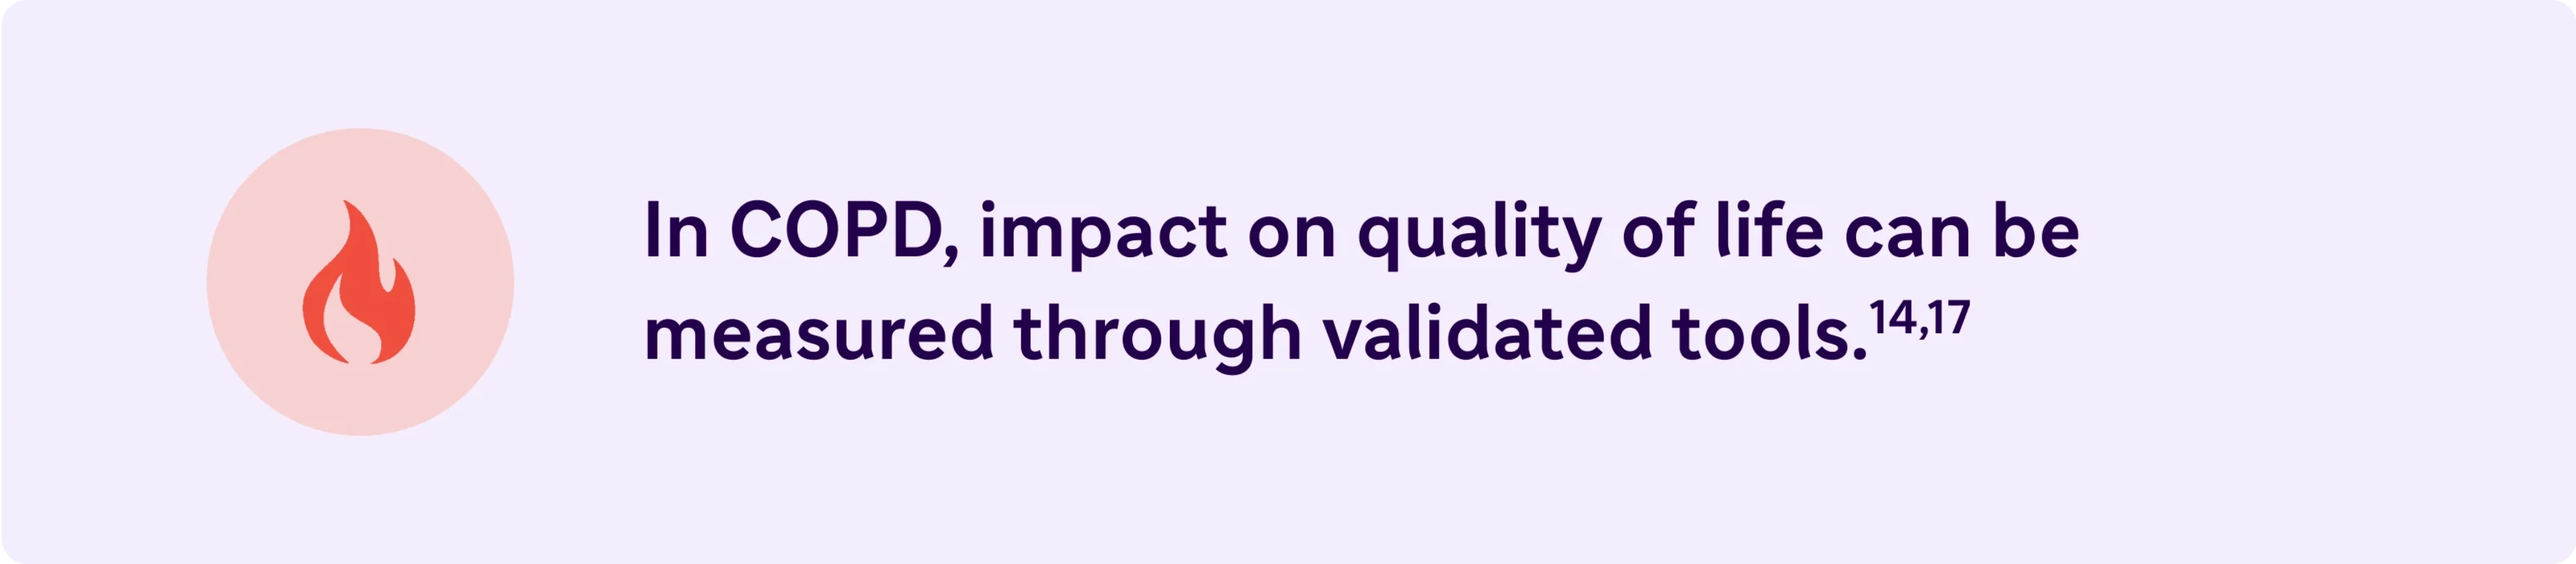 In COPD, impact on quality of life can be measured through validated tools.
